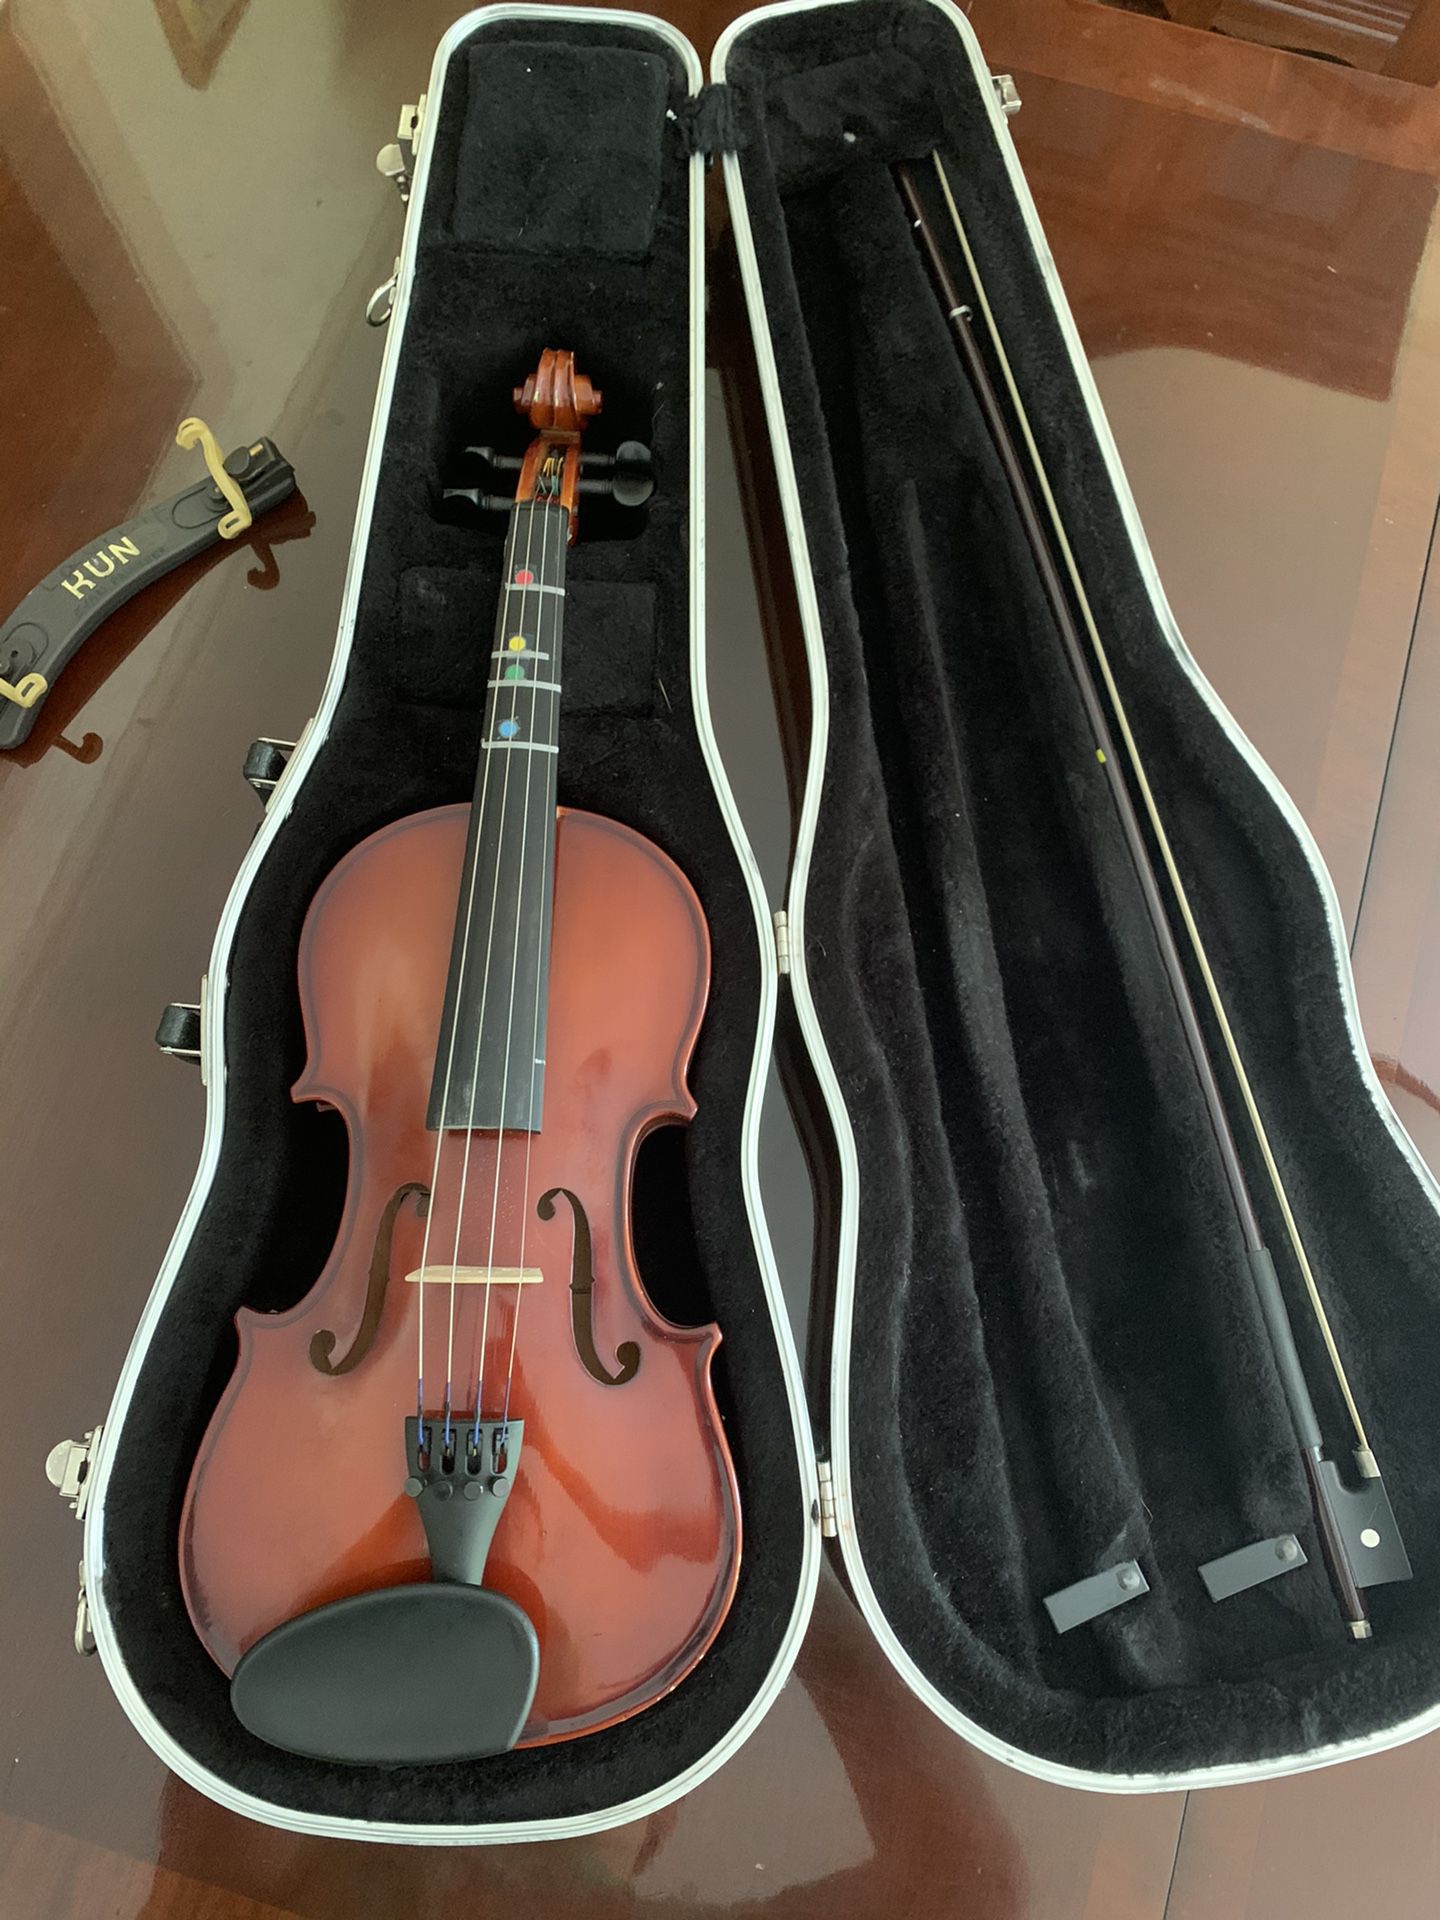 Scherl & Roth Violin, Hard Case, Bow, and Chin rest